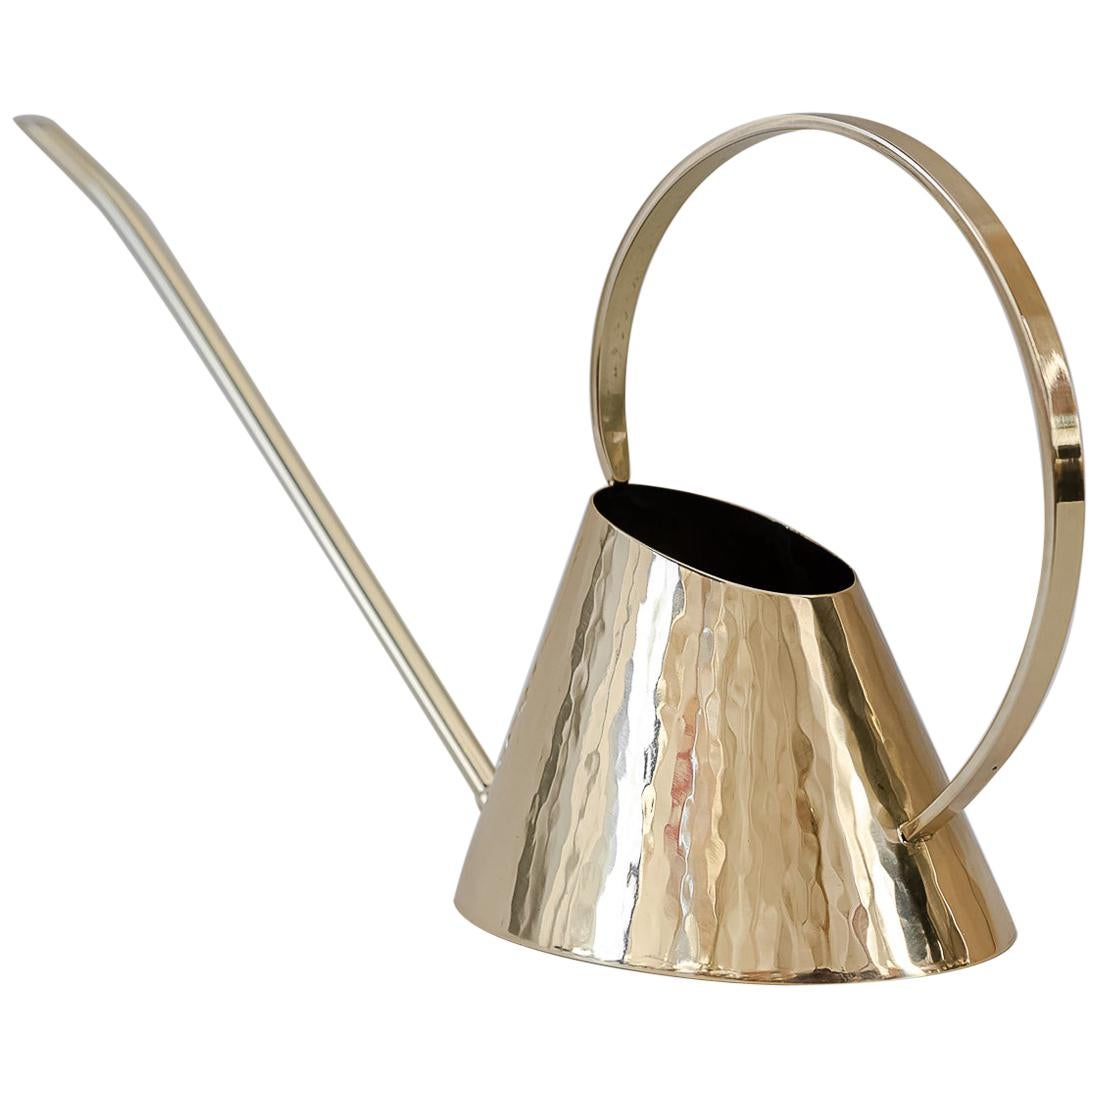 Hammered Watering Can, circa 1950s